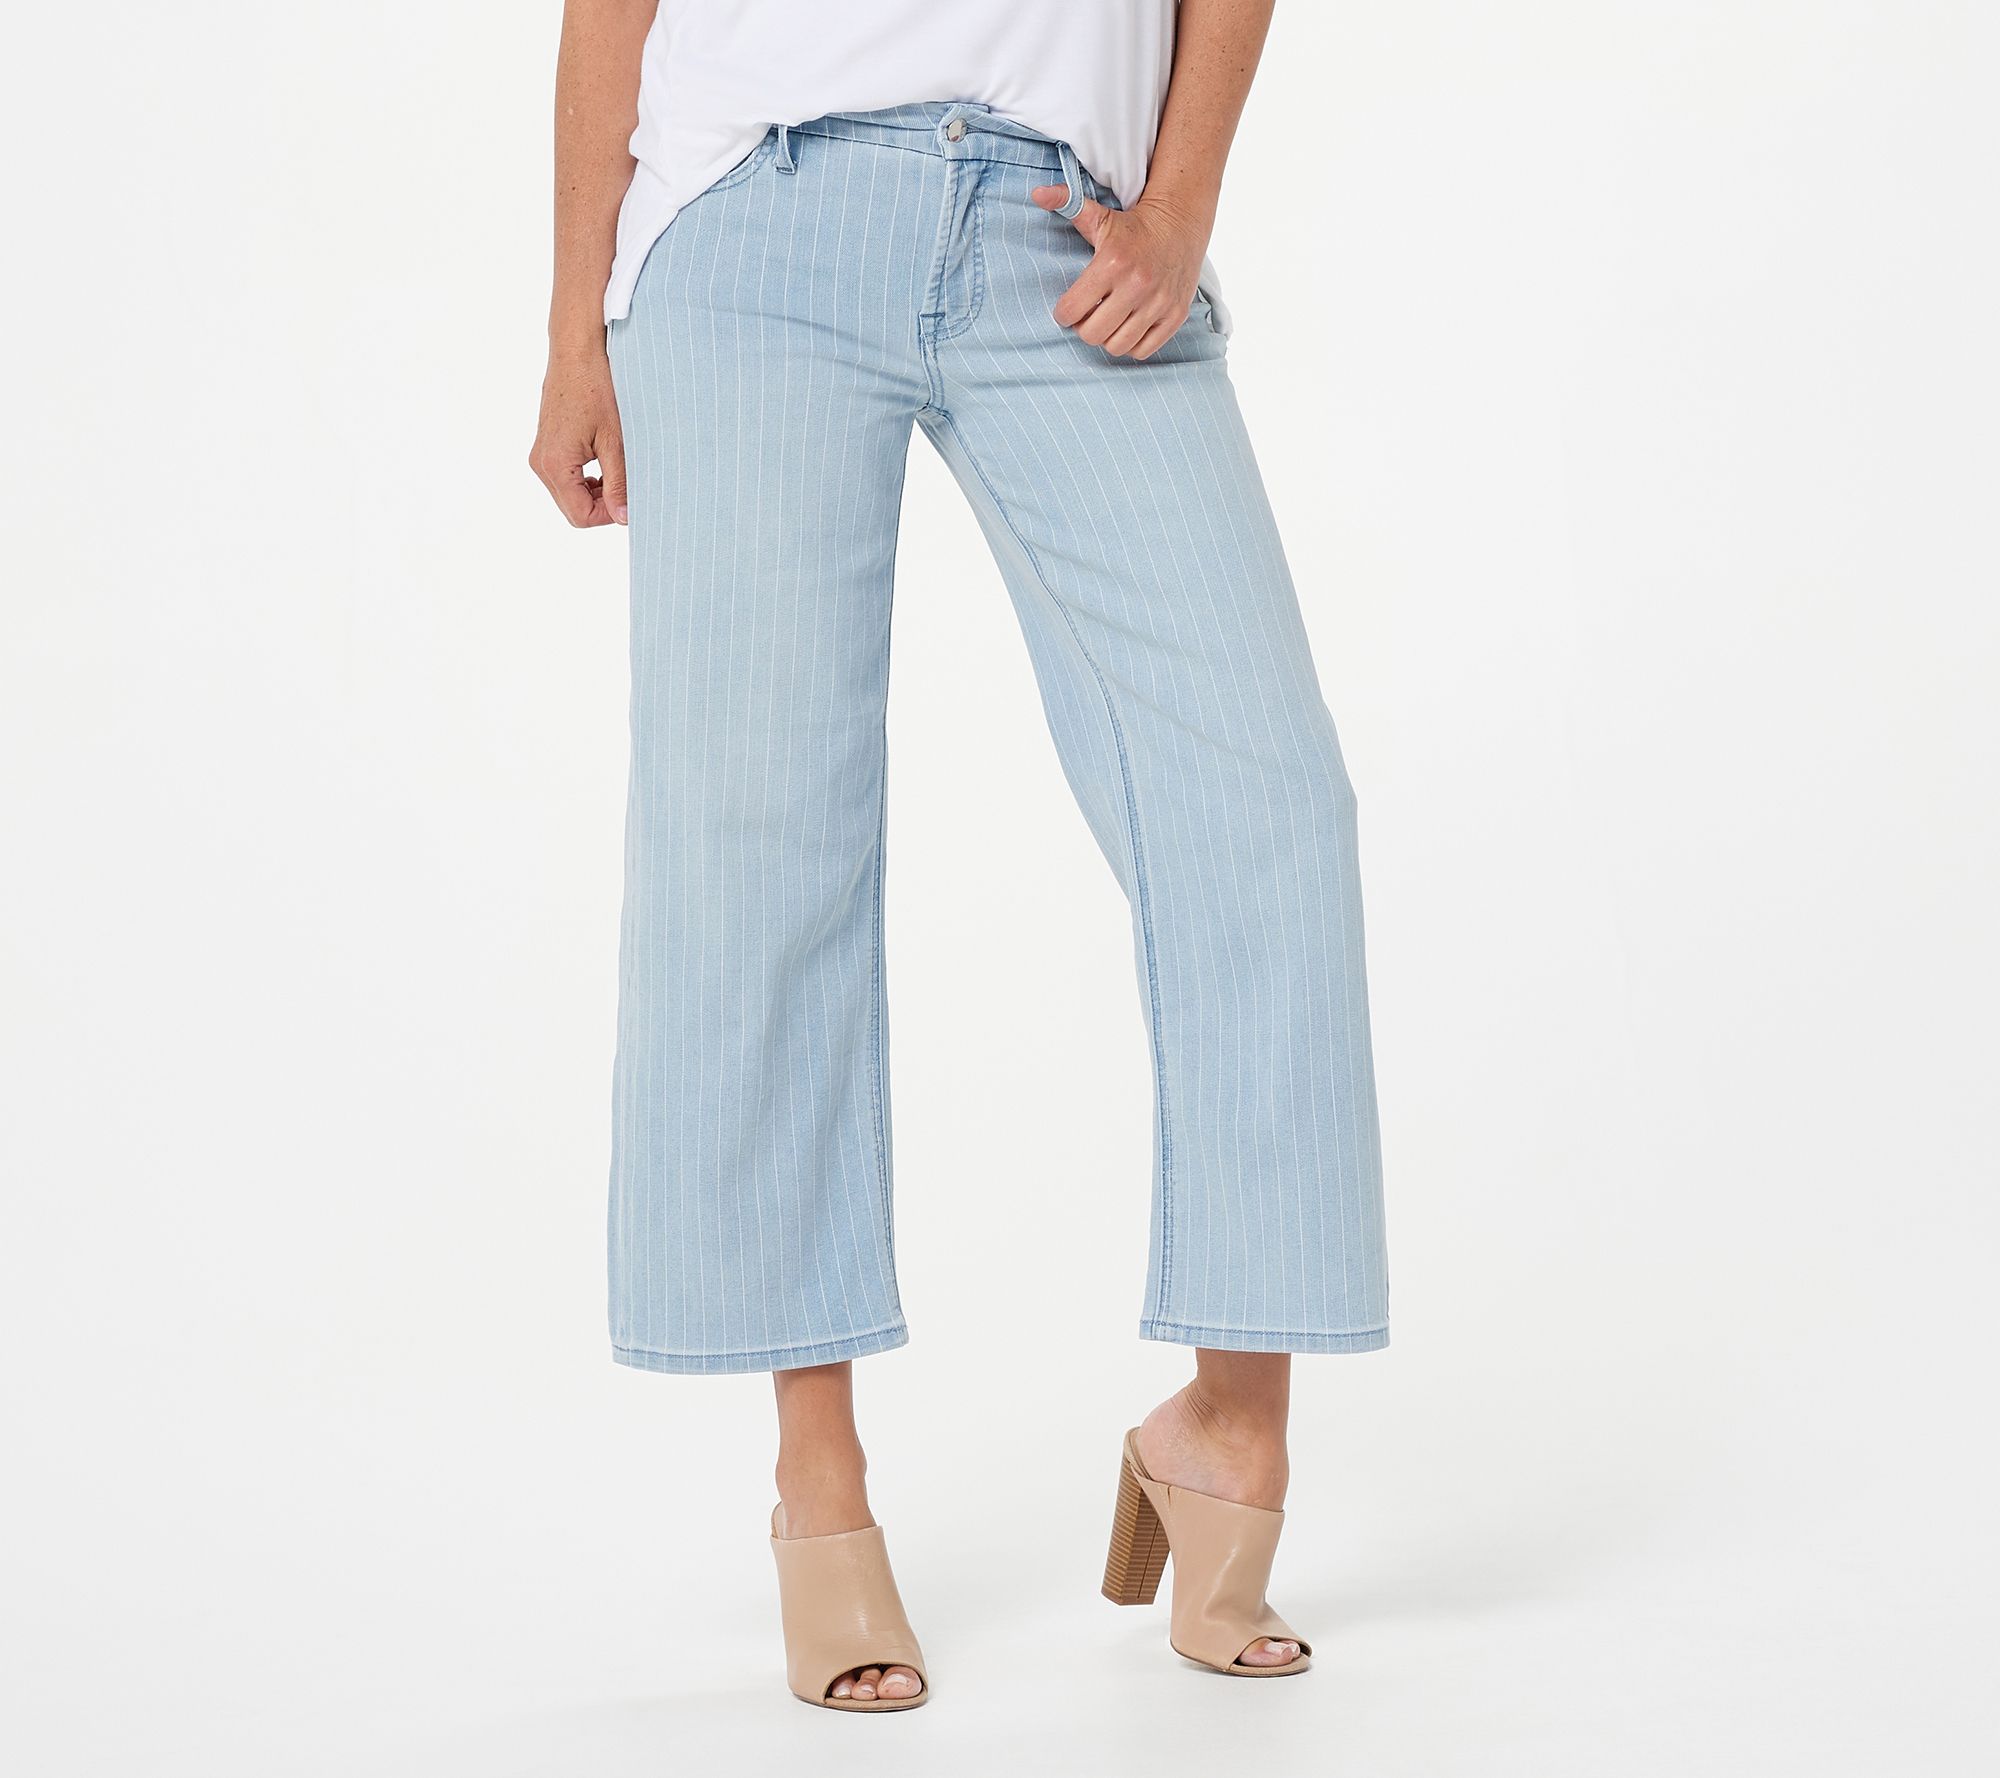 7 for all mankind cropped jeans